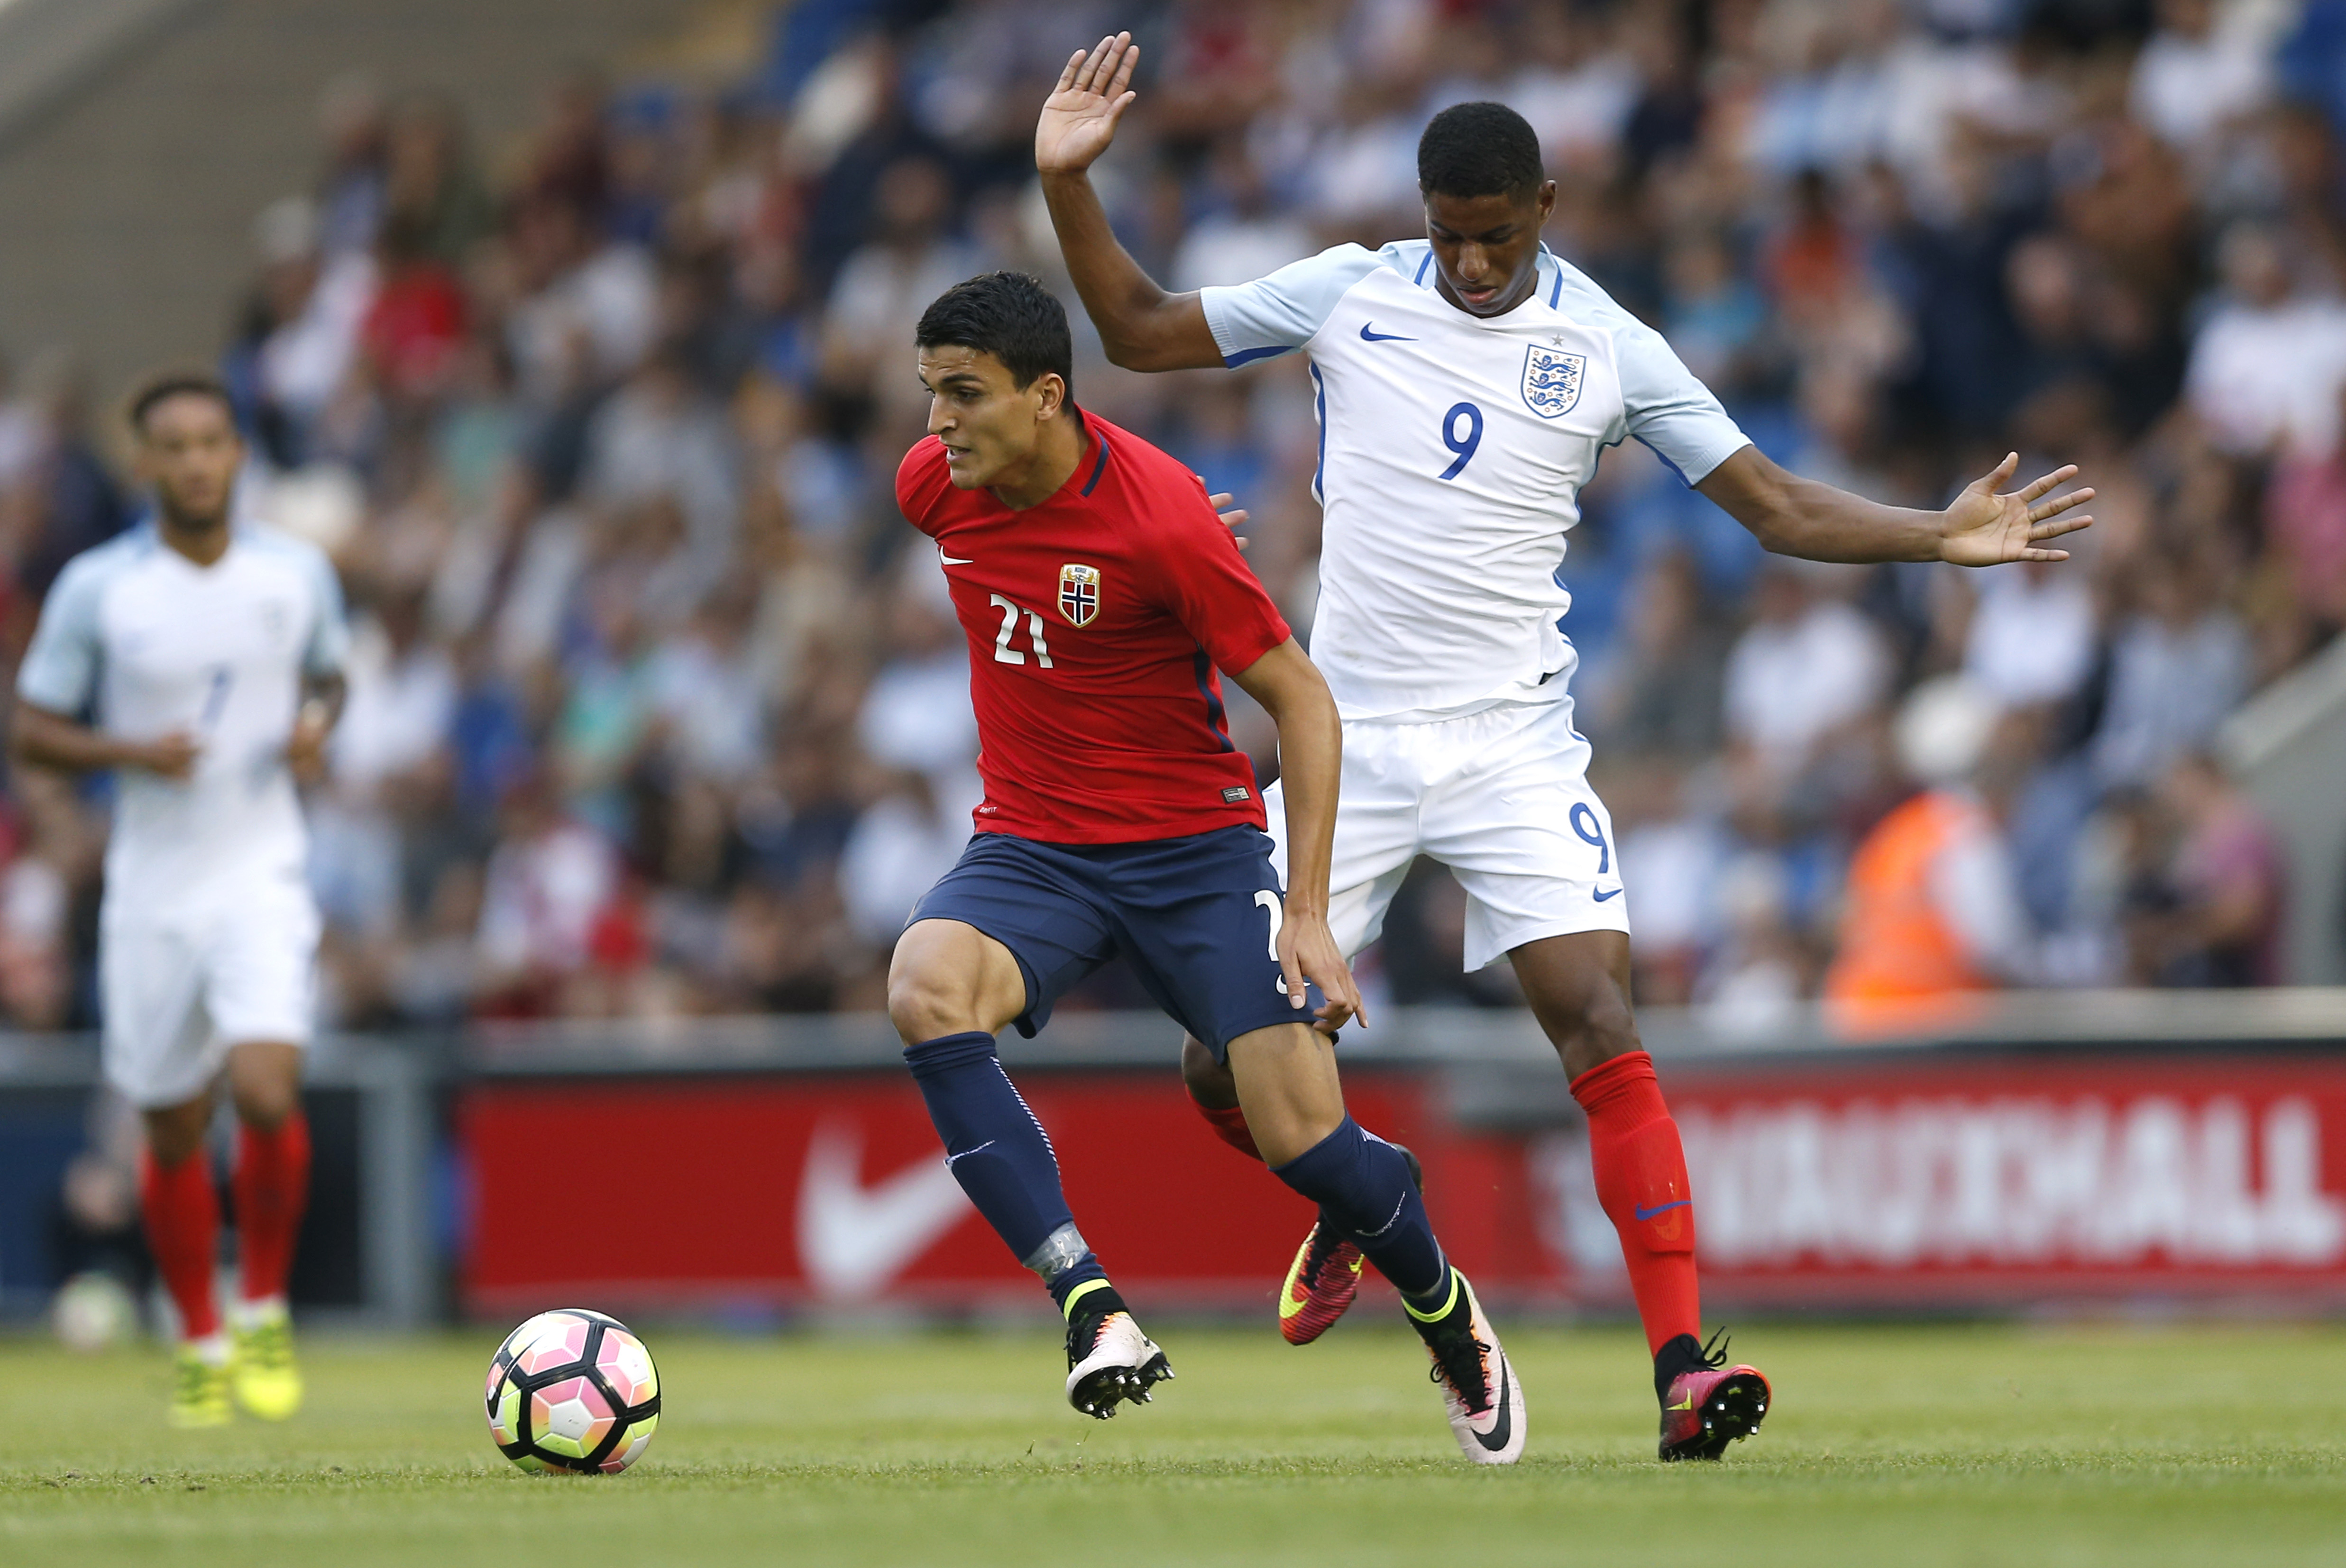 Britain Football Soccer - England v Norway - UEFA European Under 21 Championship Qualifying Group Nine - Weston Homes Community Stadium - 6/9/16 England's Marcus Rashford in action with Norway's Mohamed Elyounoussi Action Images via Reuters / Matthew Childs Livepic EDITORIAL USE ONLY.